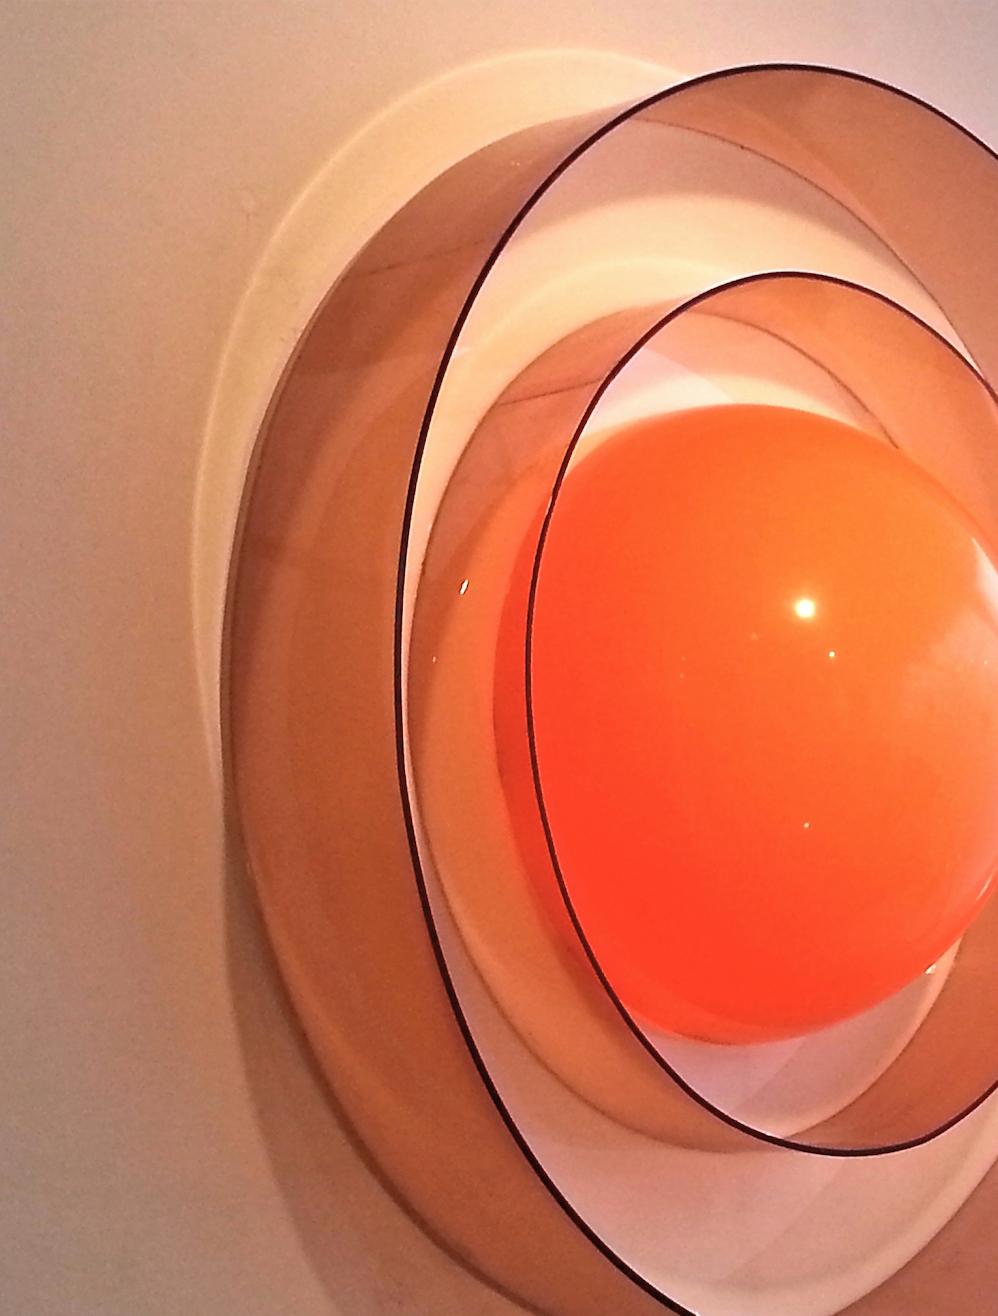 French, 1960s
large, sculptural wall light with domed orange acrylic 'egg yolk' concealing the lighting element, surrounded by two concentric smoke perspex bands.
(2 identical additional wall lights are available). 